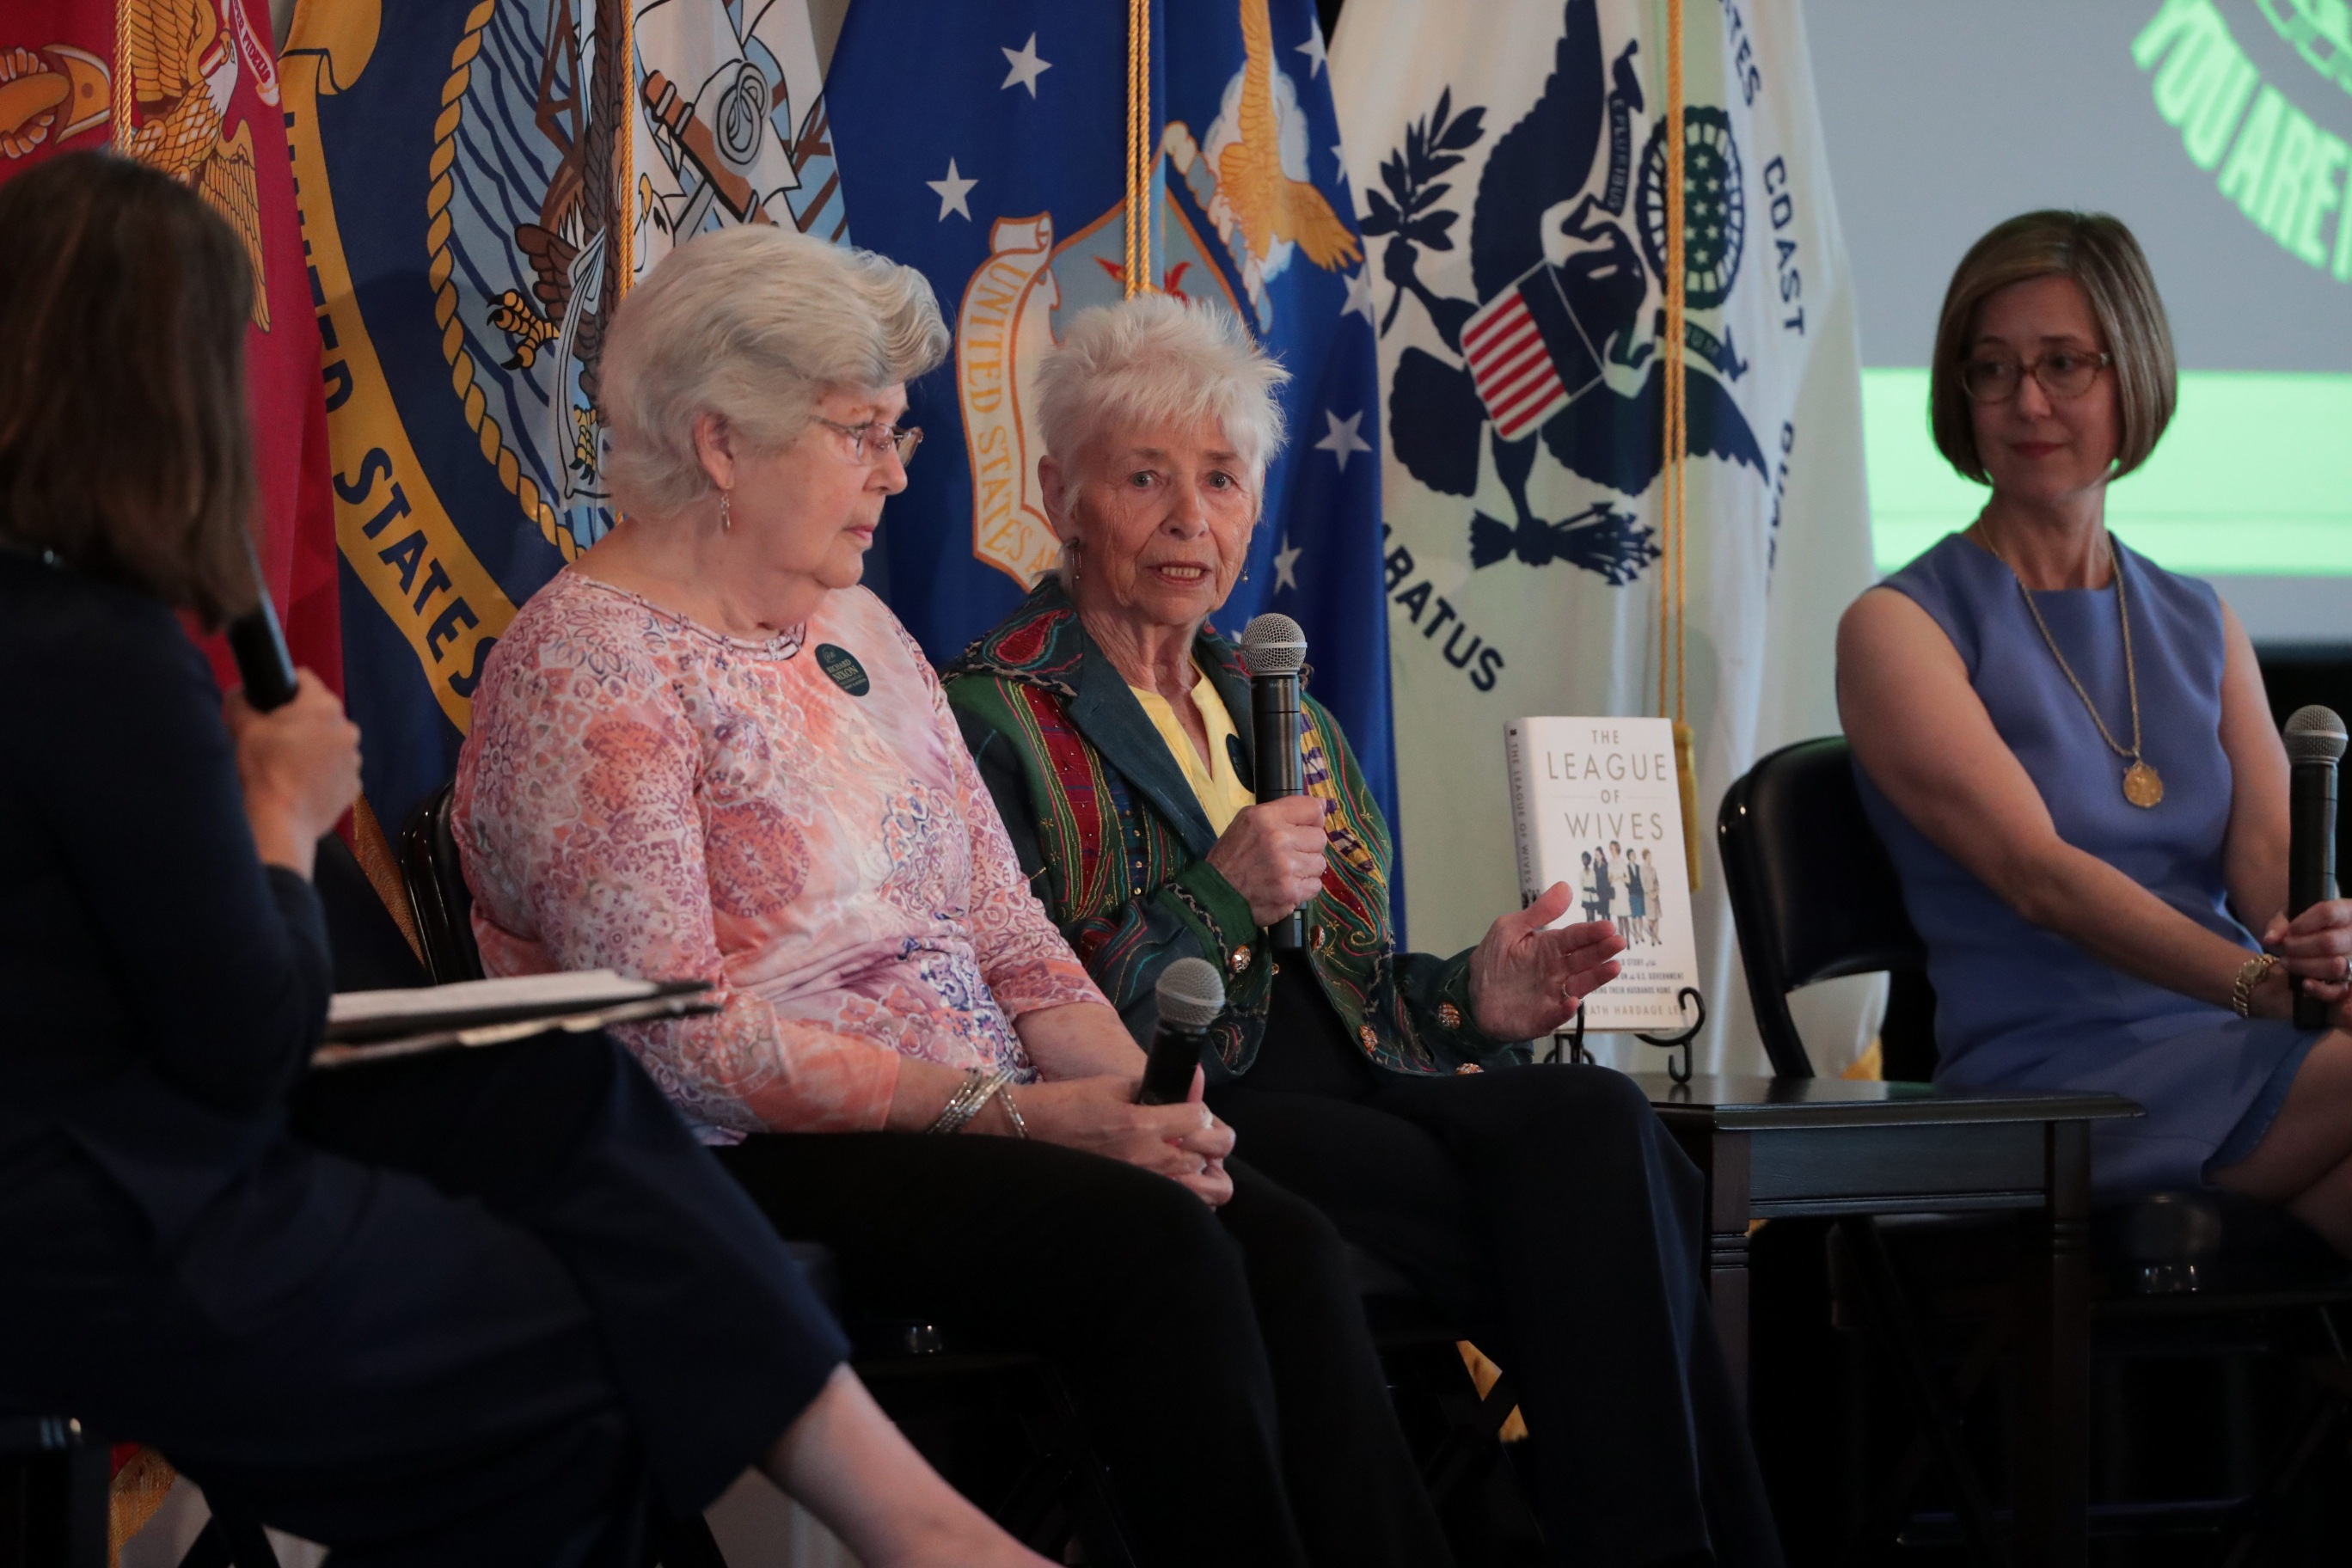 Event Recap: POWs Wives Honored on Memorial Day